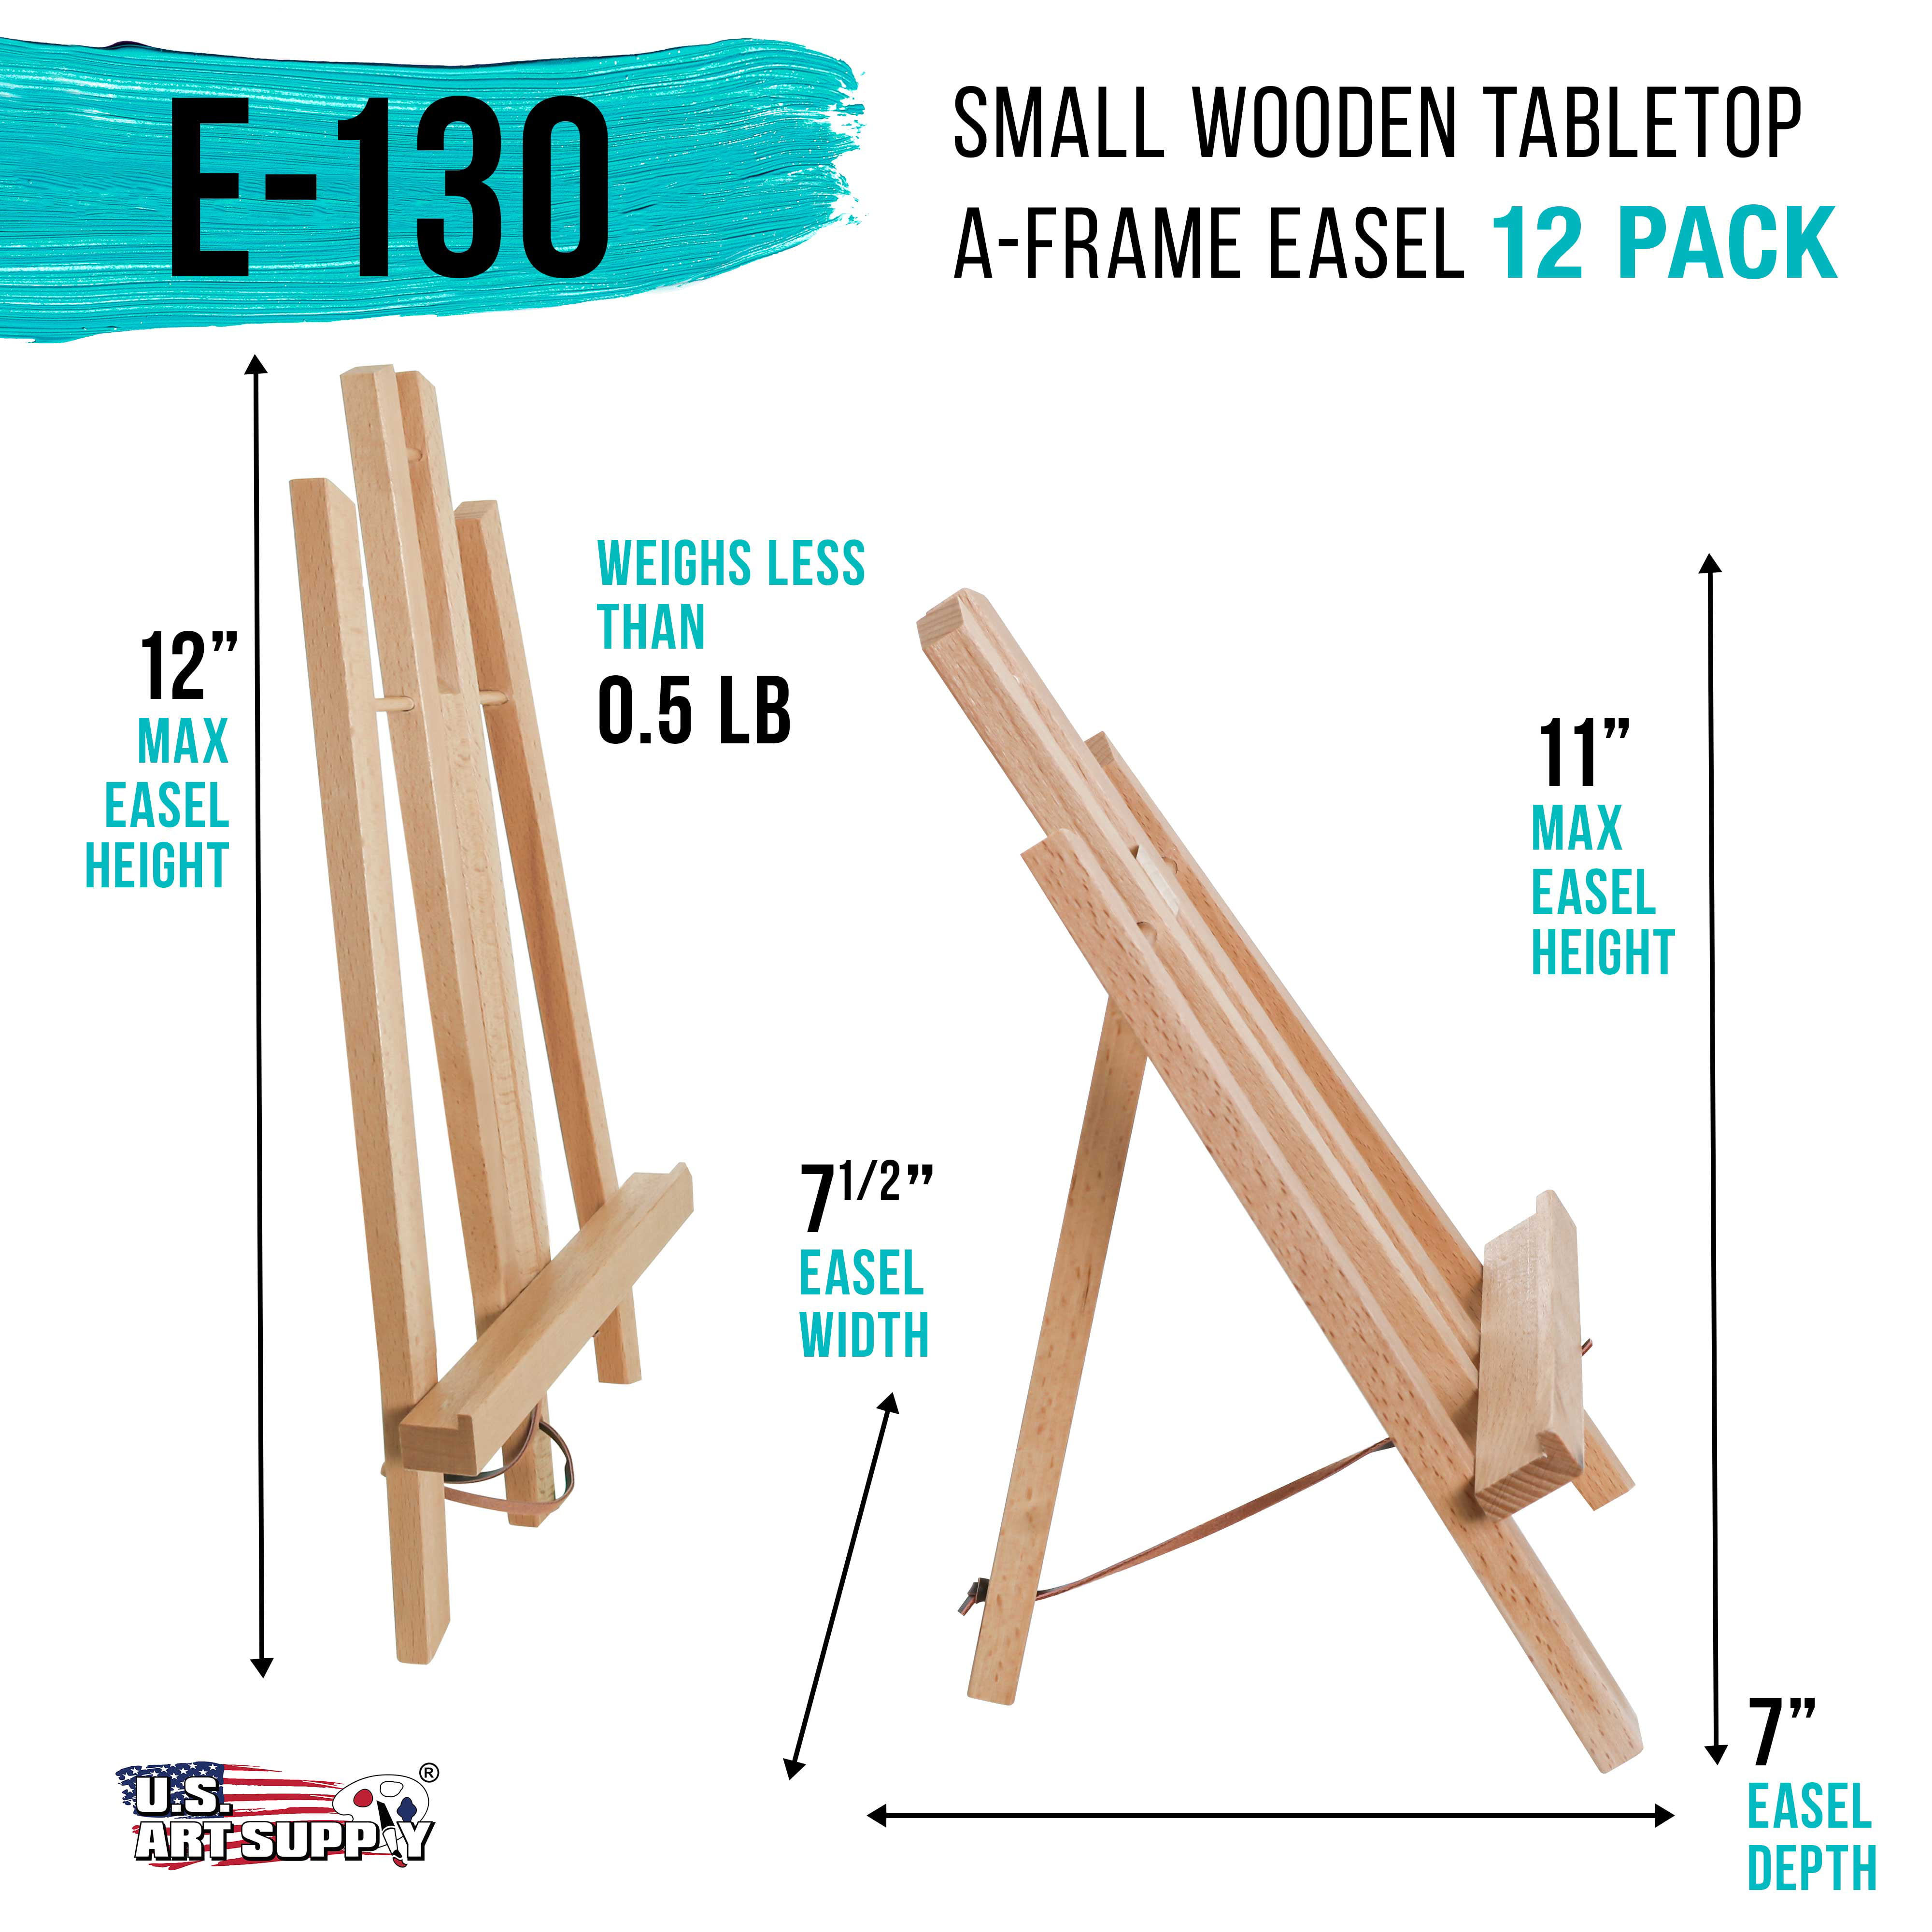 Sugars Portable Wooden Tripod Tabletop Display Small Easel for Sketching Painting Small Artist Easel Phase Frame 9 inch 9-inch 9 